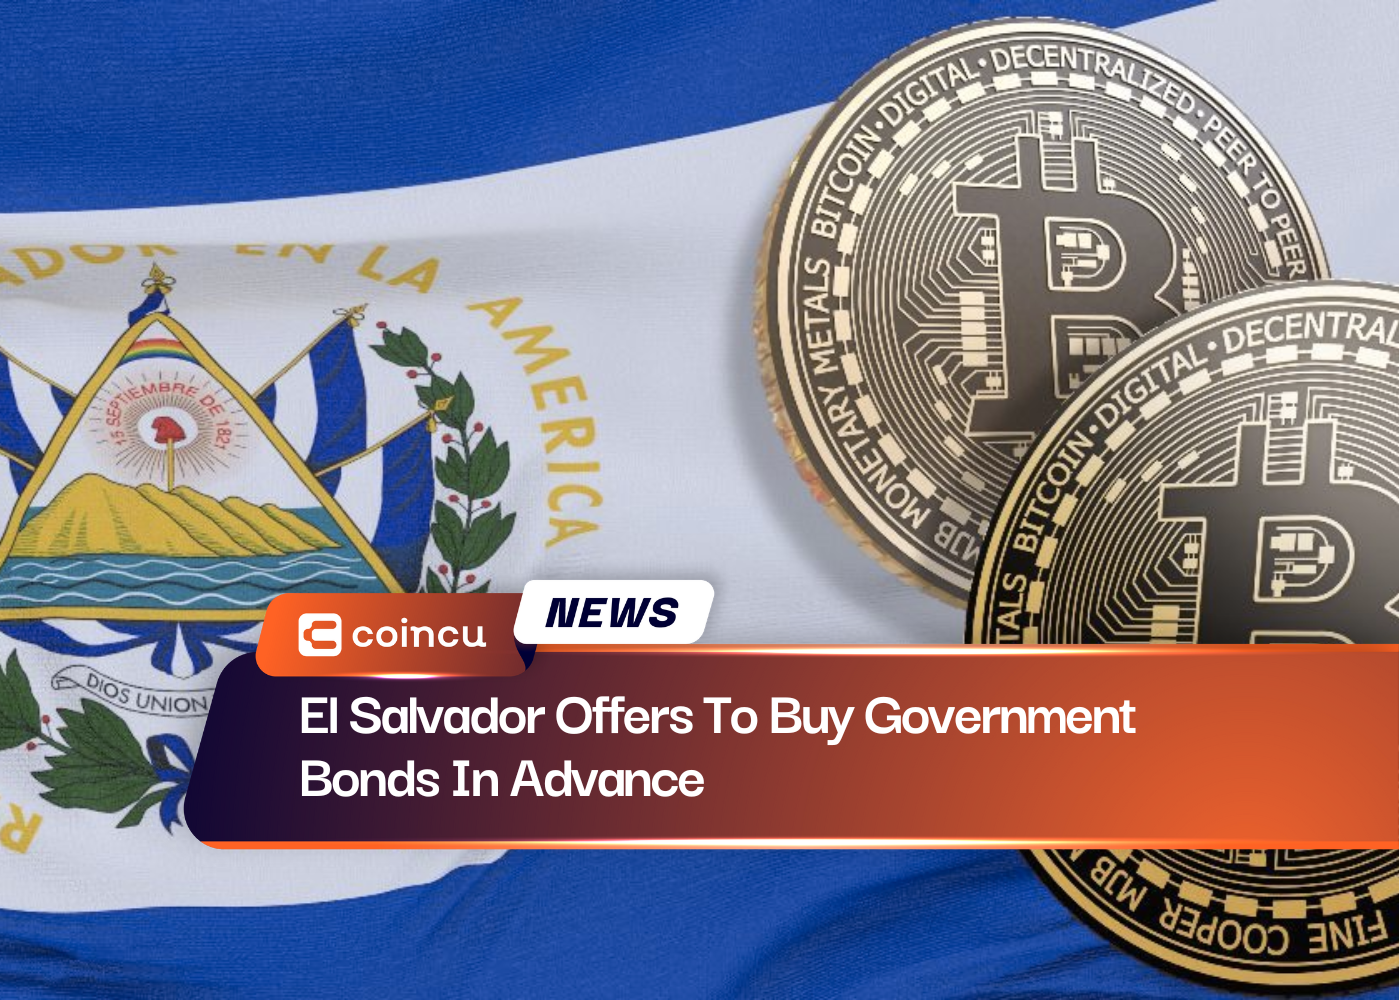 El Salvador Offers To Buy Government Bonds In Advance